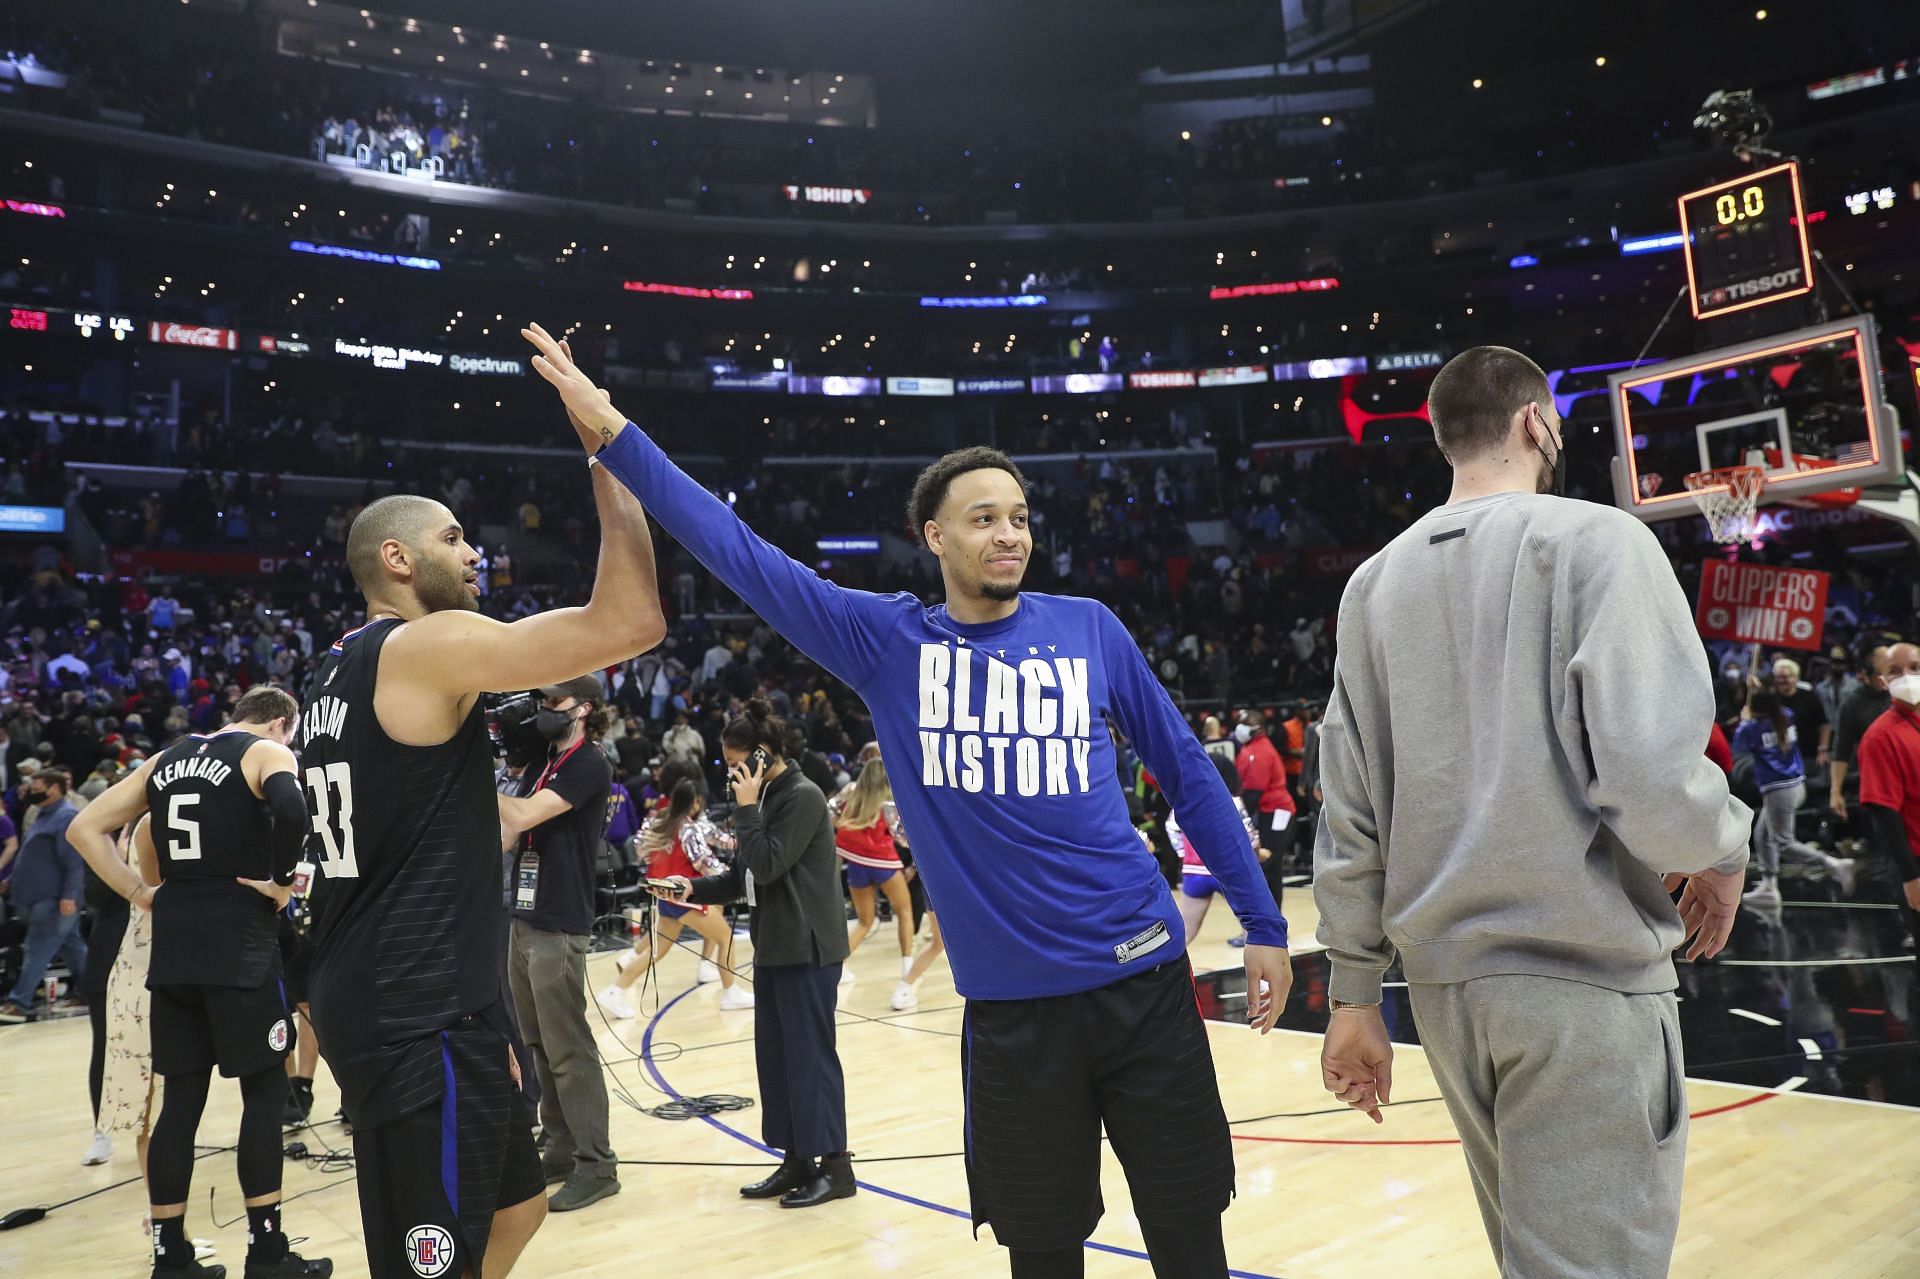 Amir Coffey #7 and Nicolas Batum #33 of the LA Clippers celebrate after defeating the Los Angeles Lakers 111-110 at Crypto.com Arena